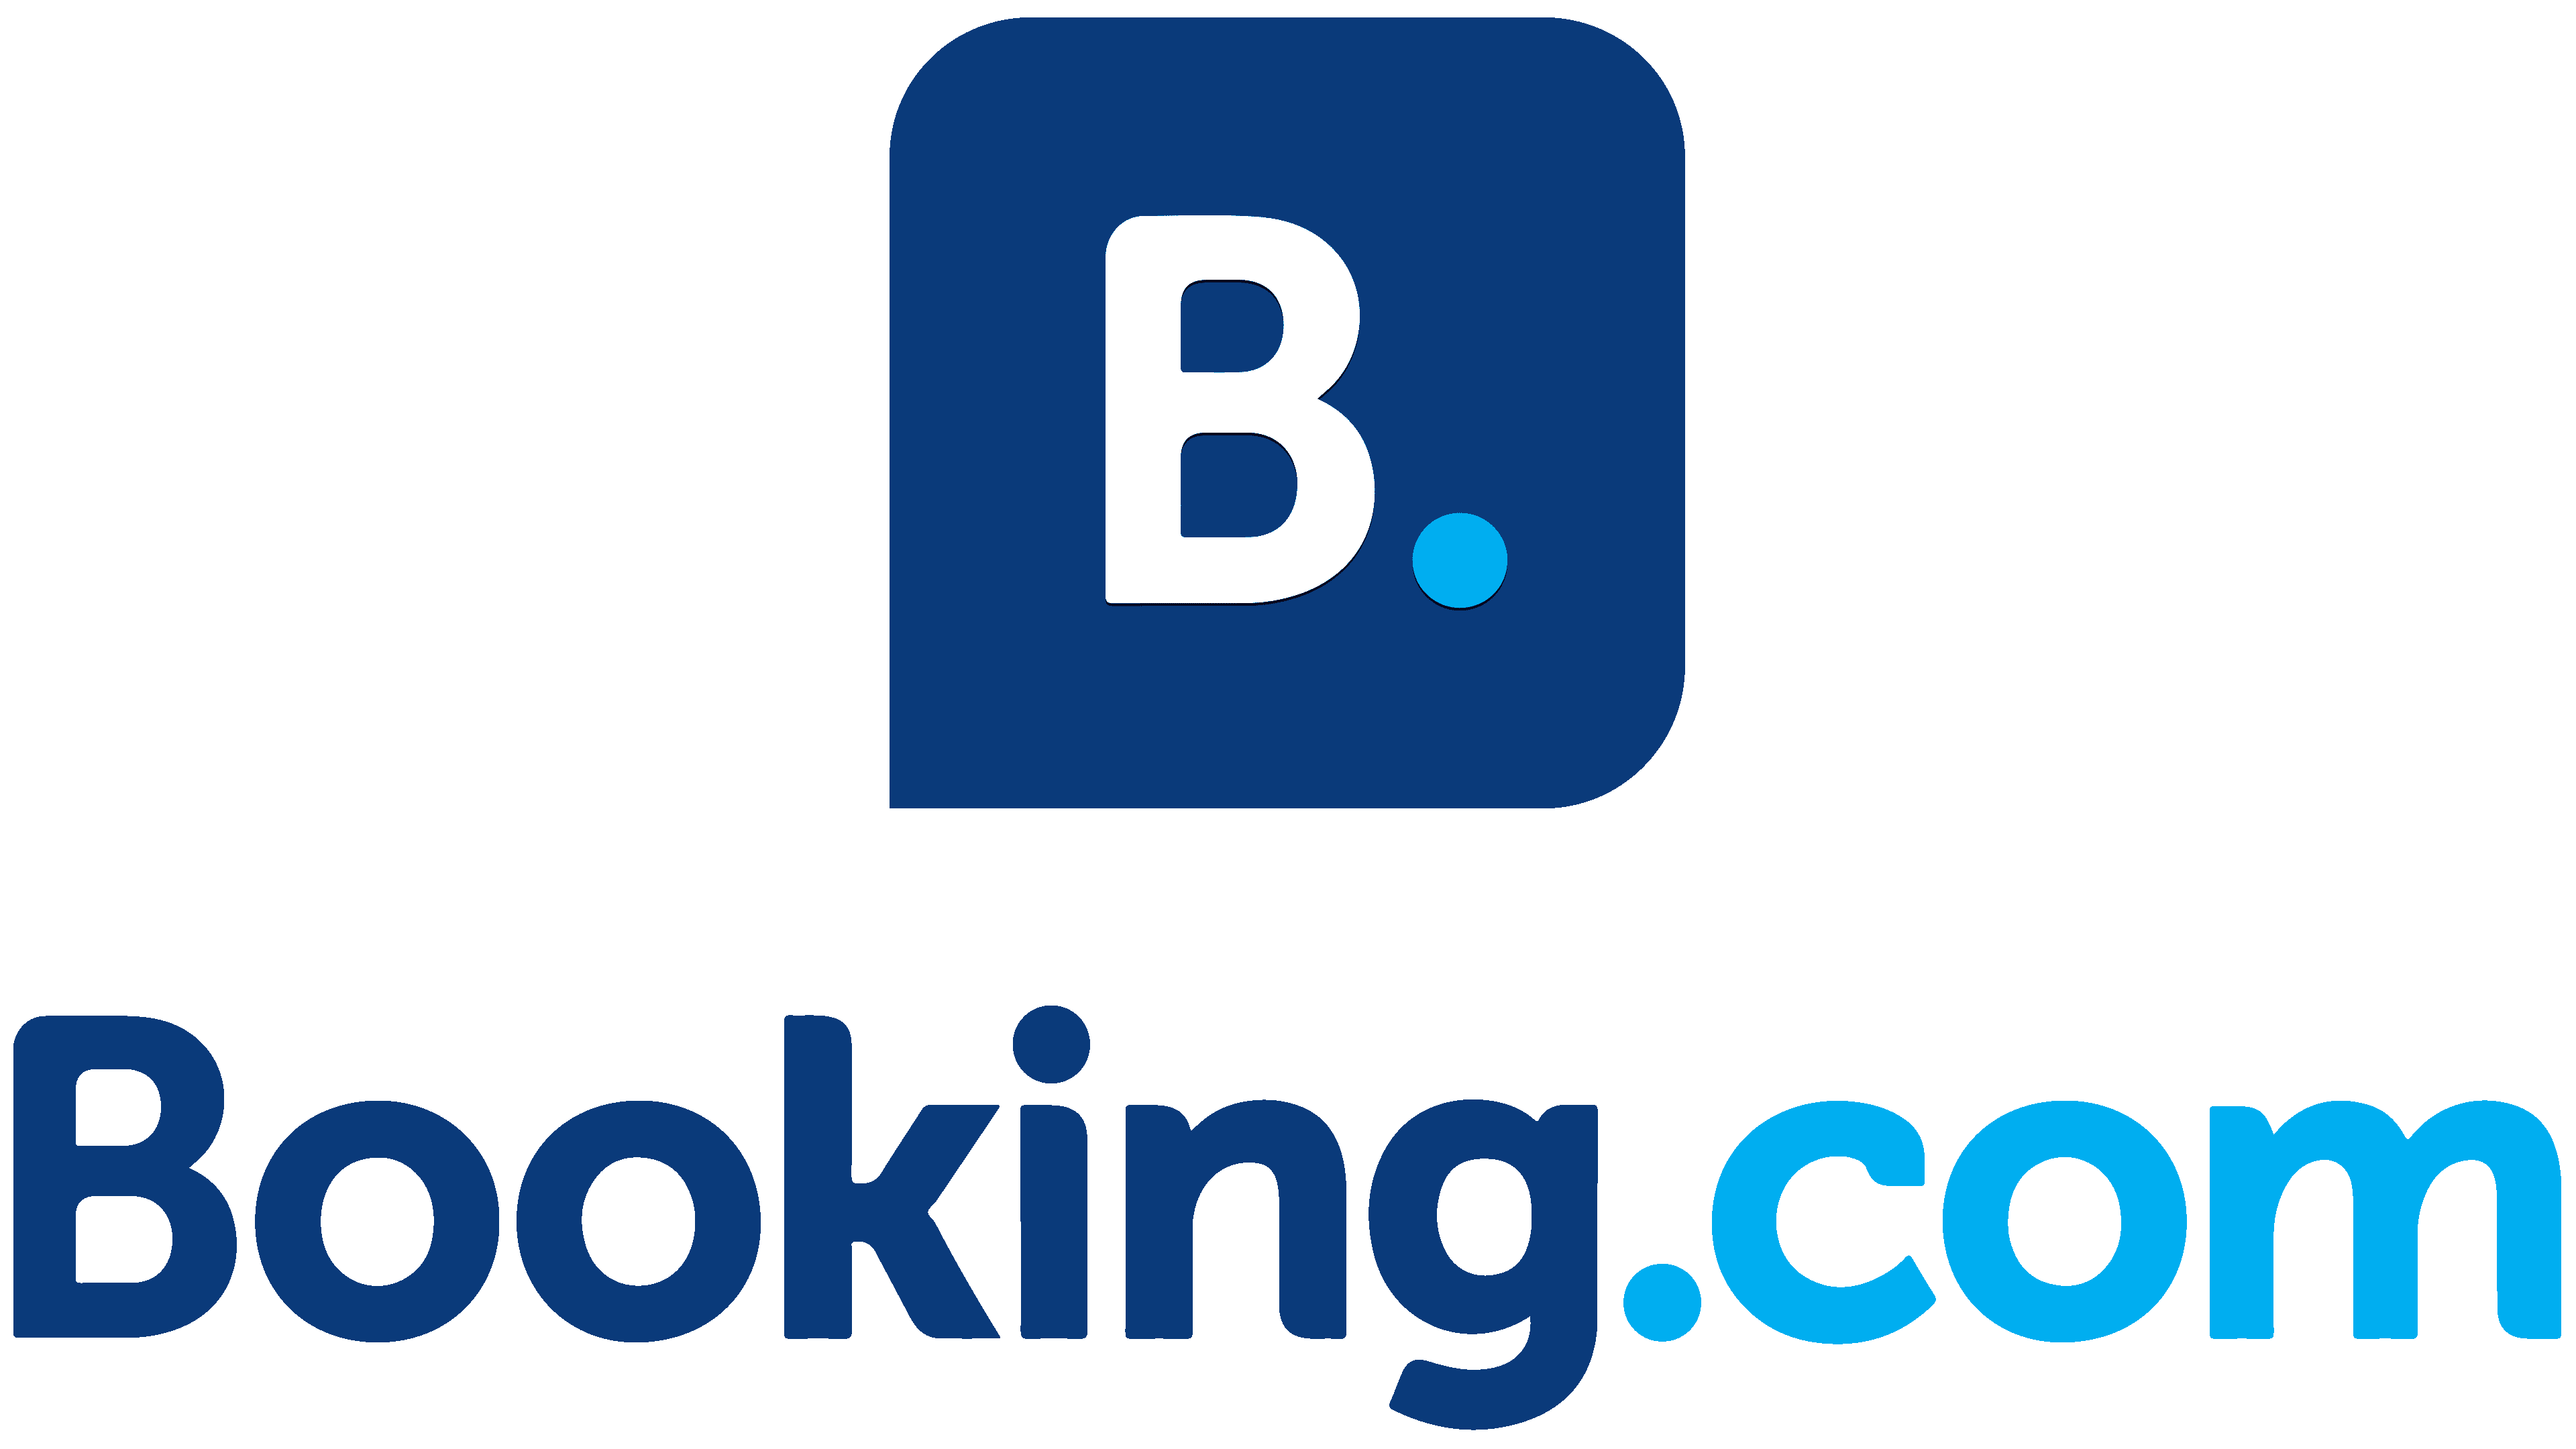 Booking.com Leaves Hotel Owners With Substantial Financial Shortfalls